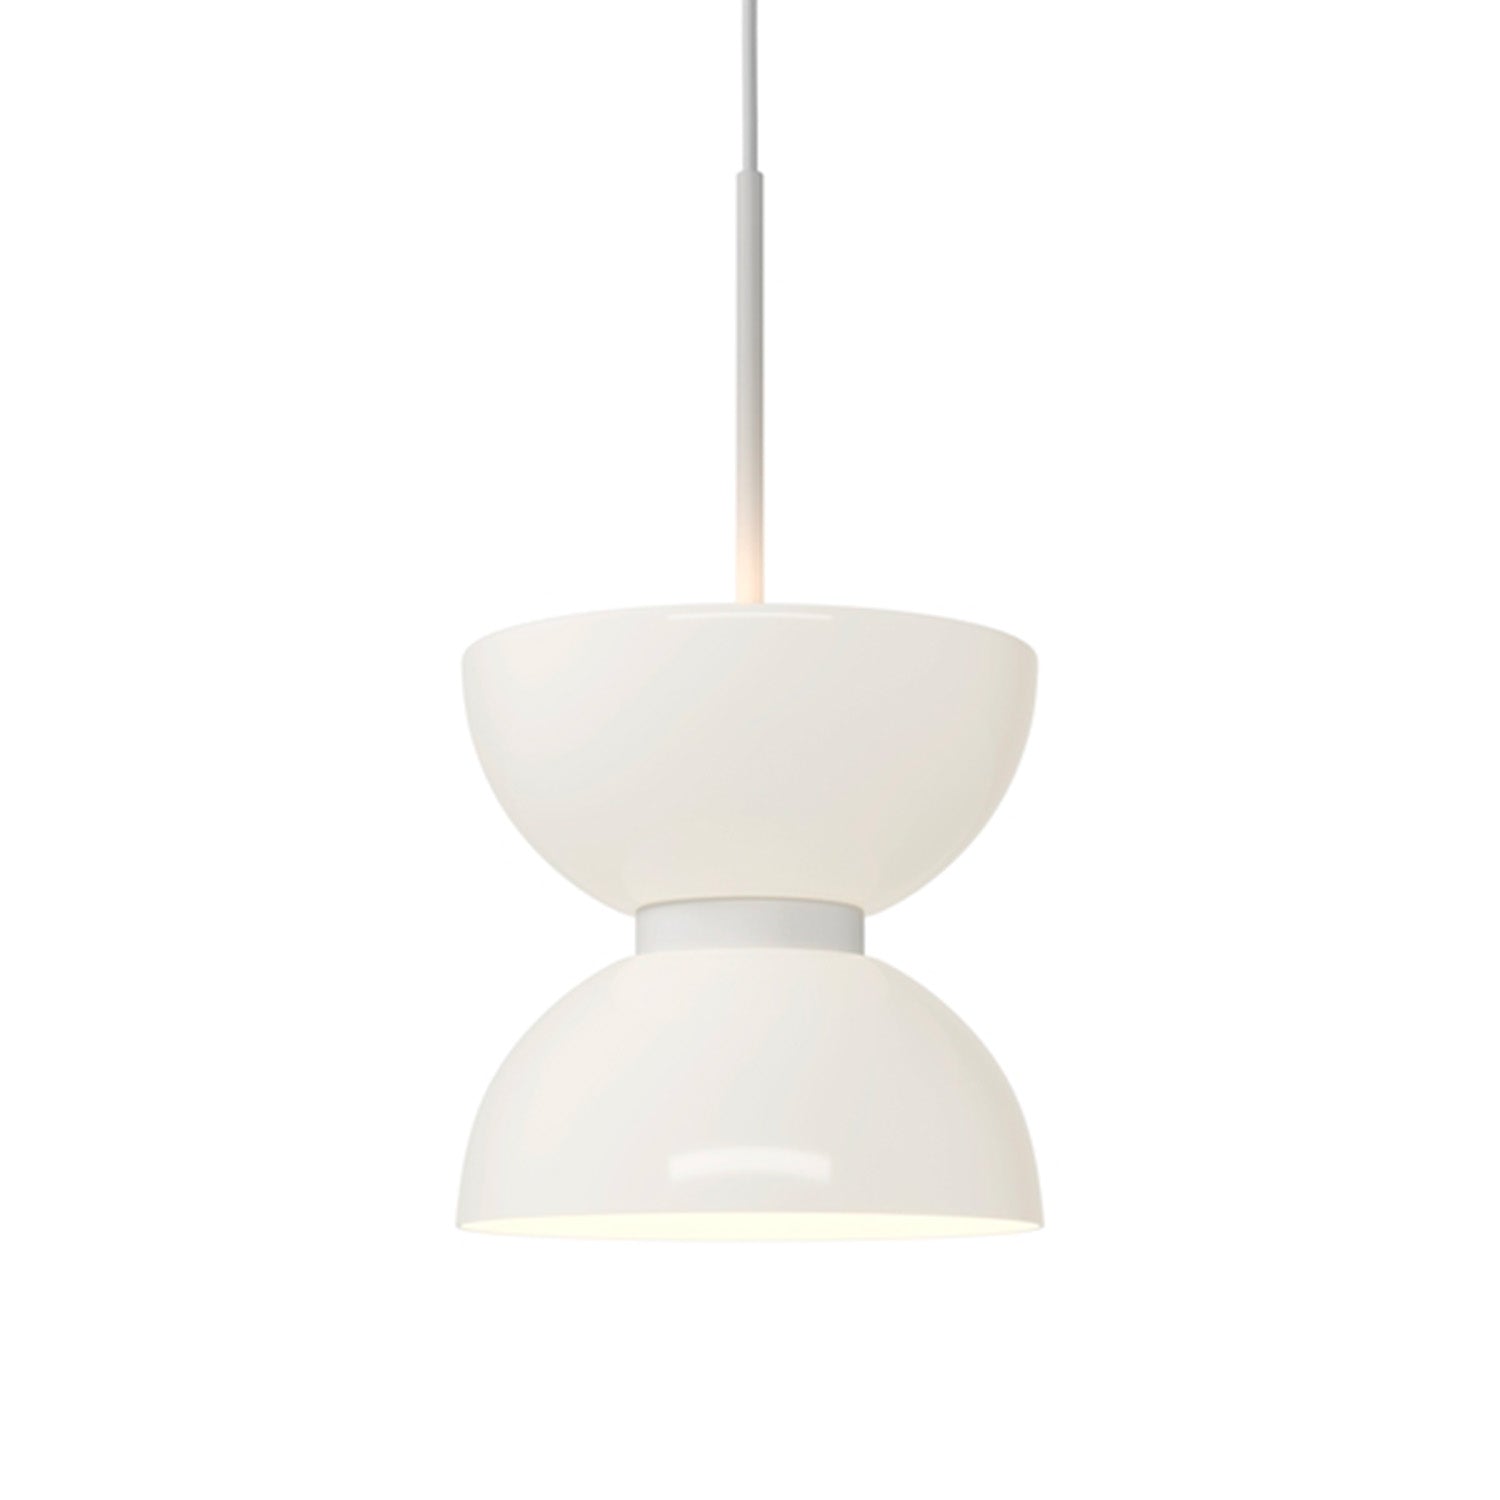 KYOTO - Pendant light in white opaque glass with integrated LED